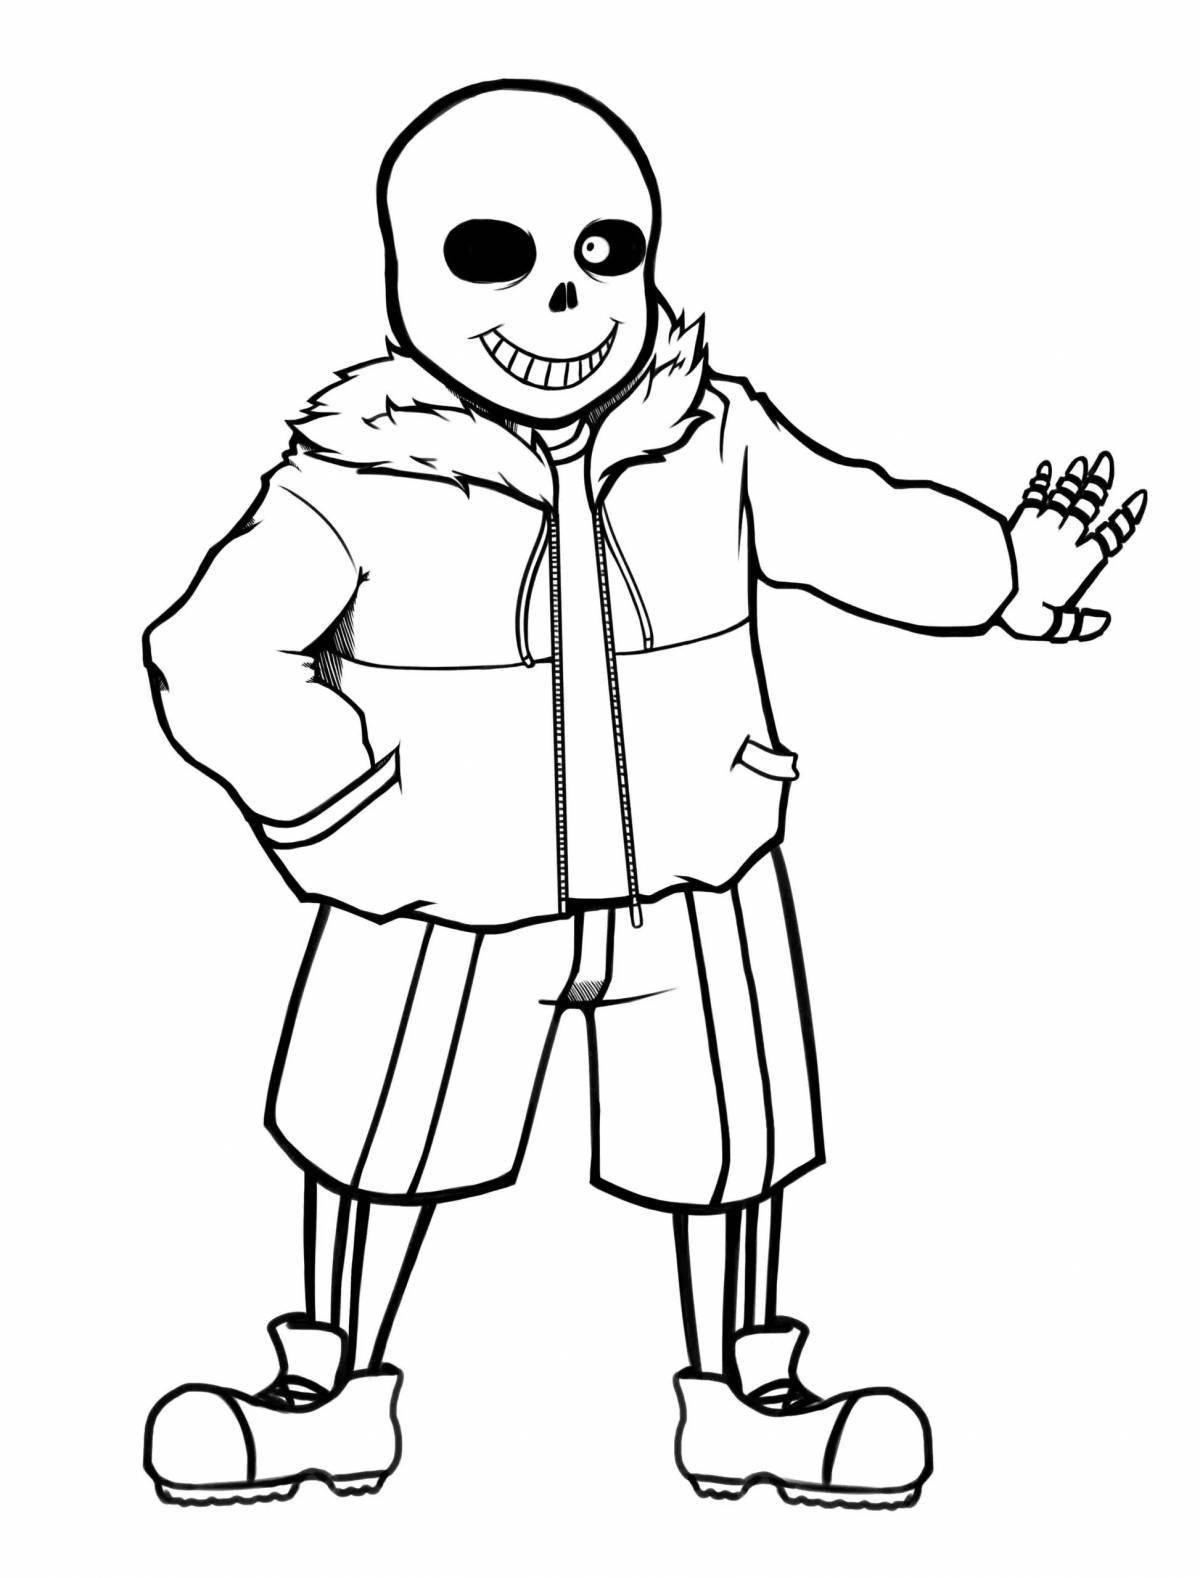 Coloring page cheerful papyrus and sans